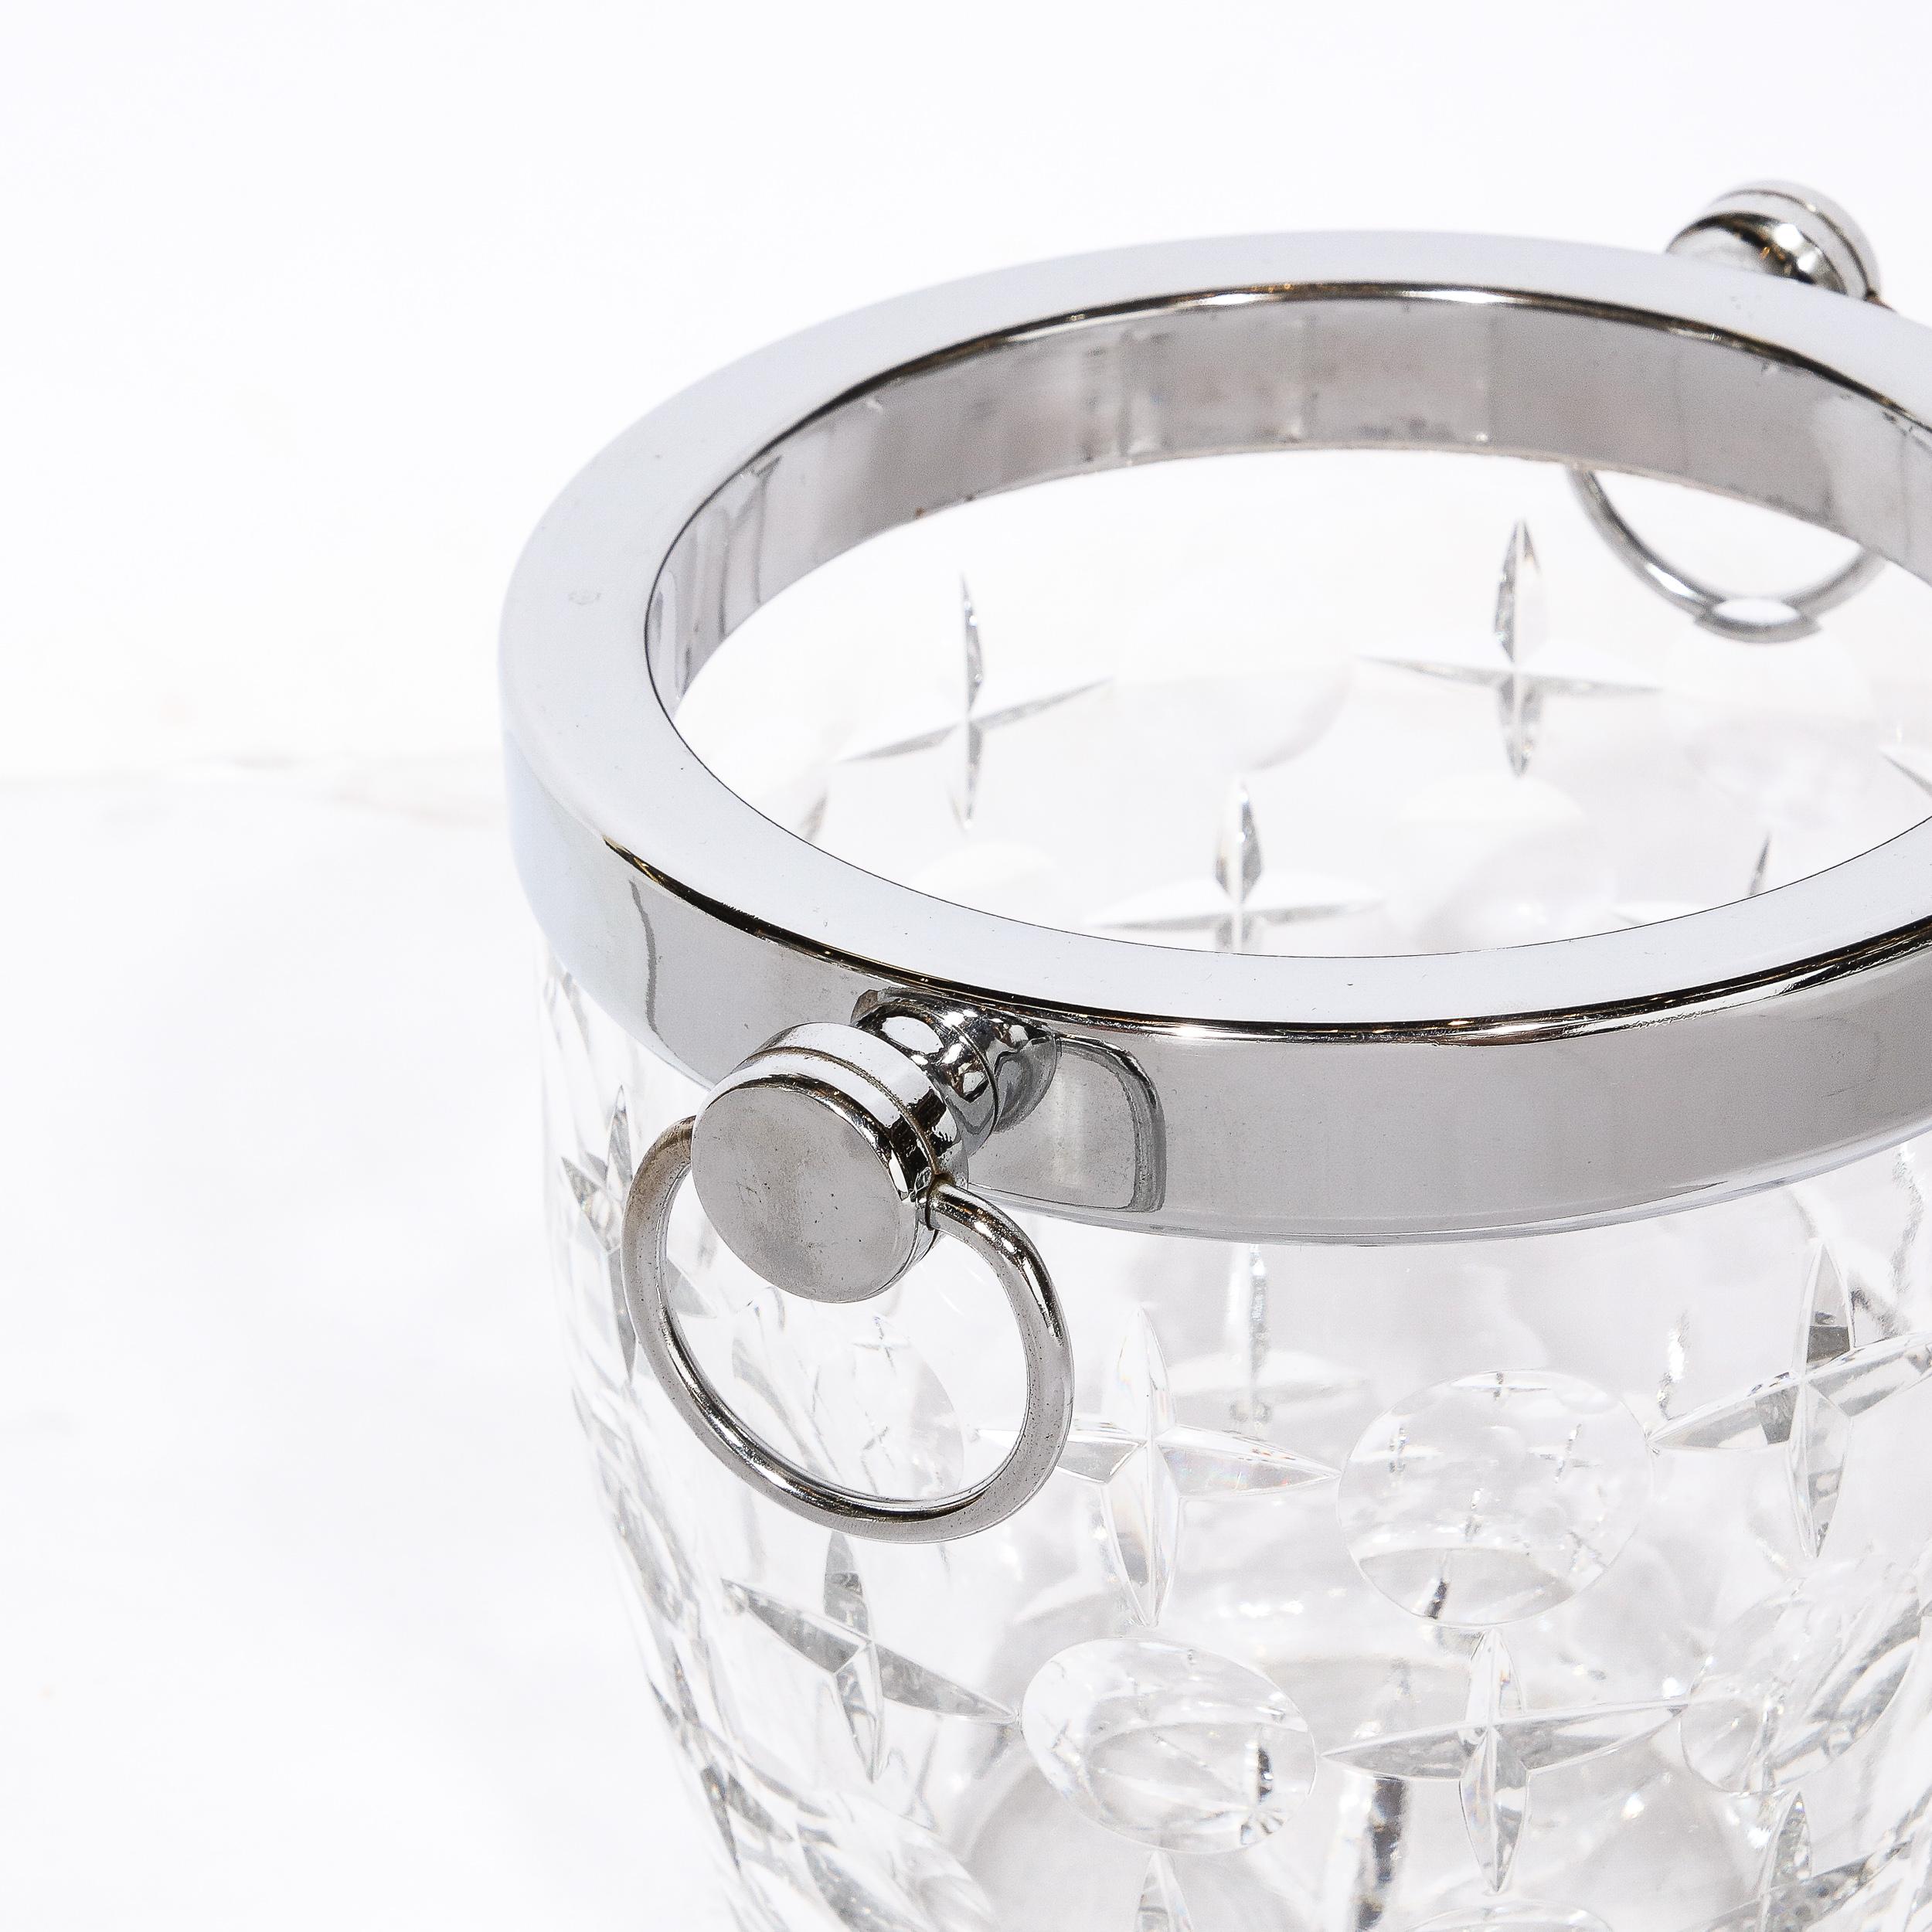 Mid-Century Modernist Cut Crystal Ice Bucket with Chrome Fittings & Loop Handles For Sale 6